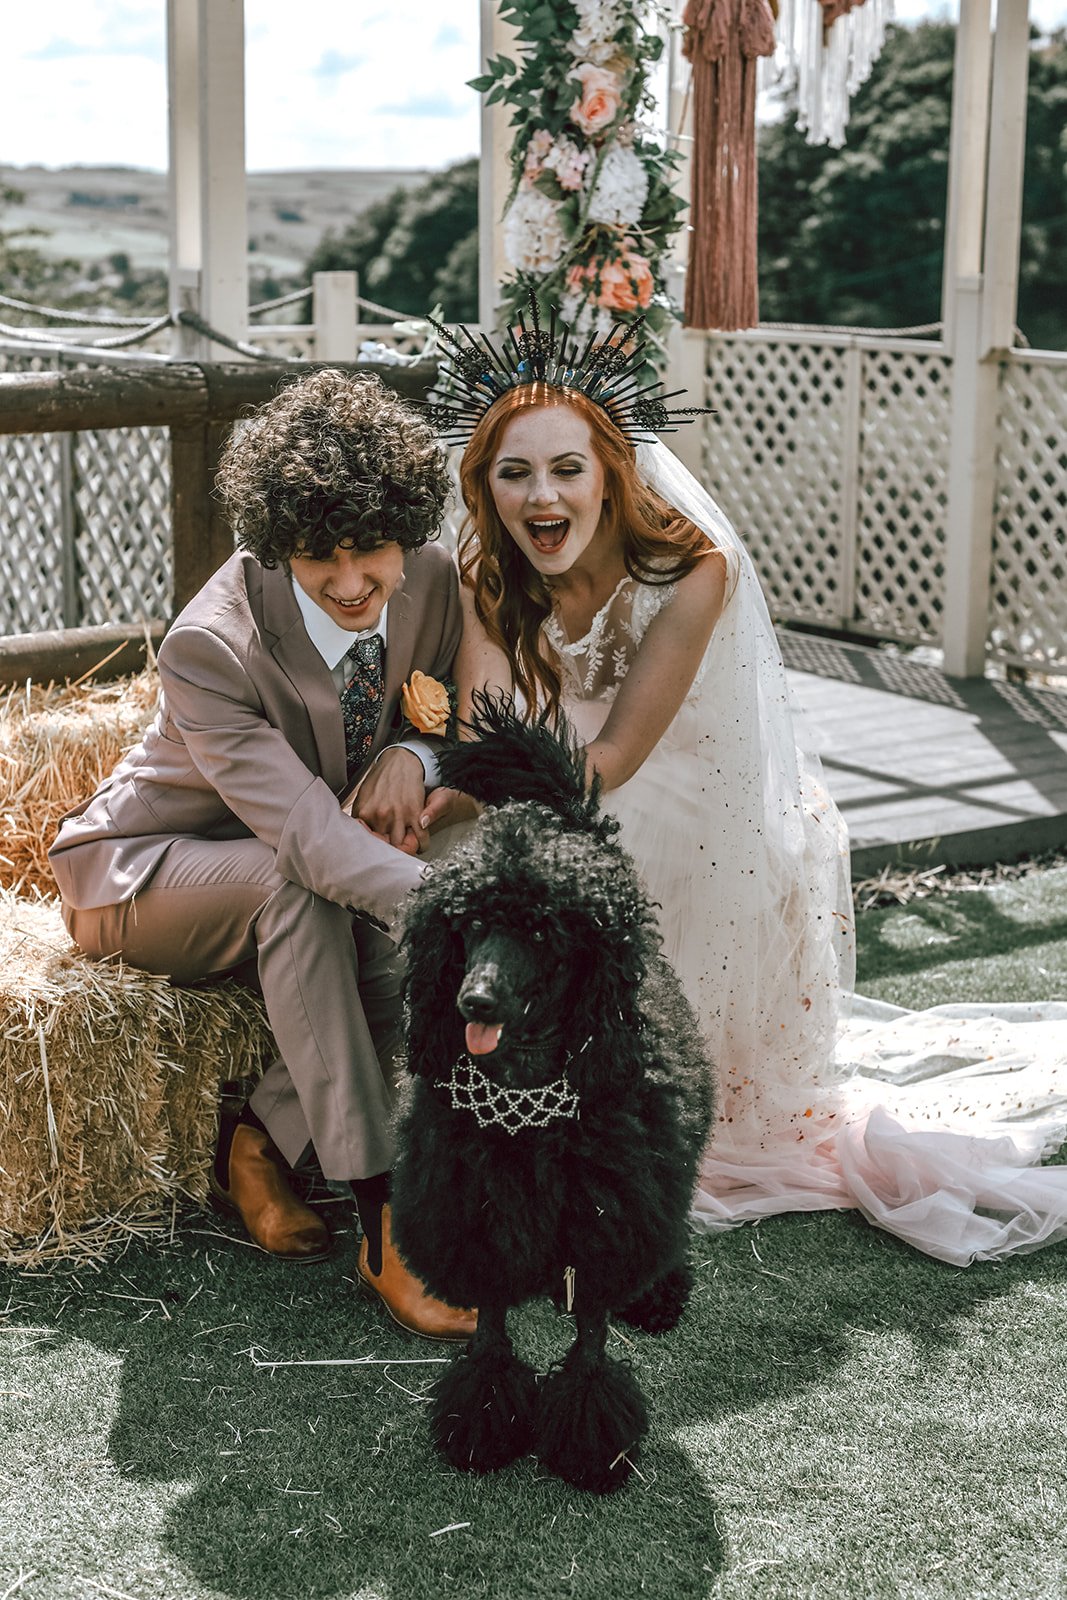 black poodle wearing a decorative collar at a wedding